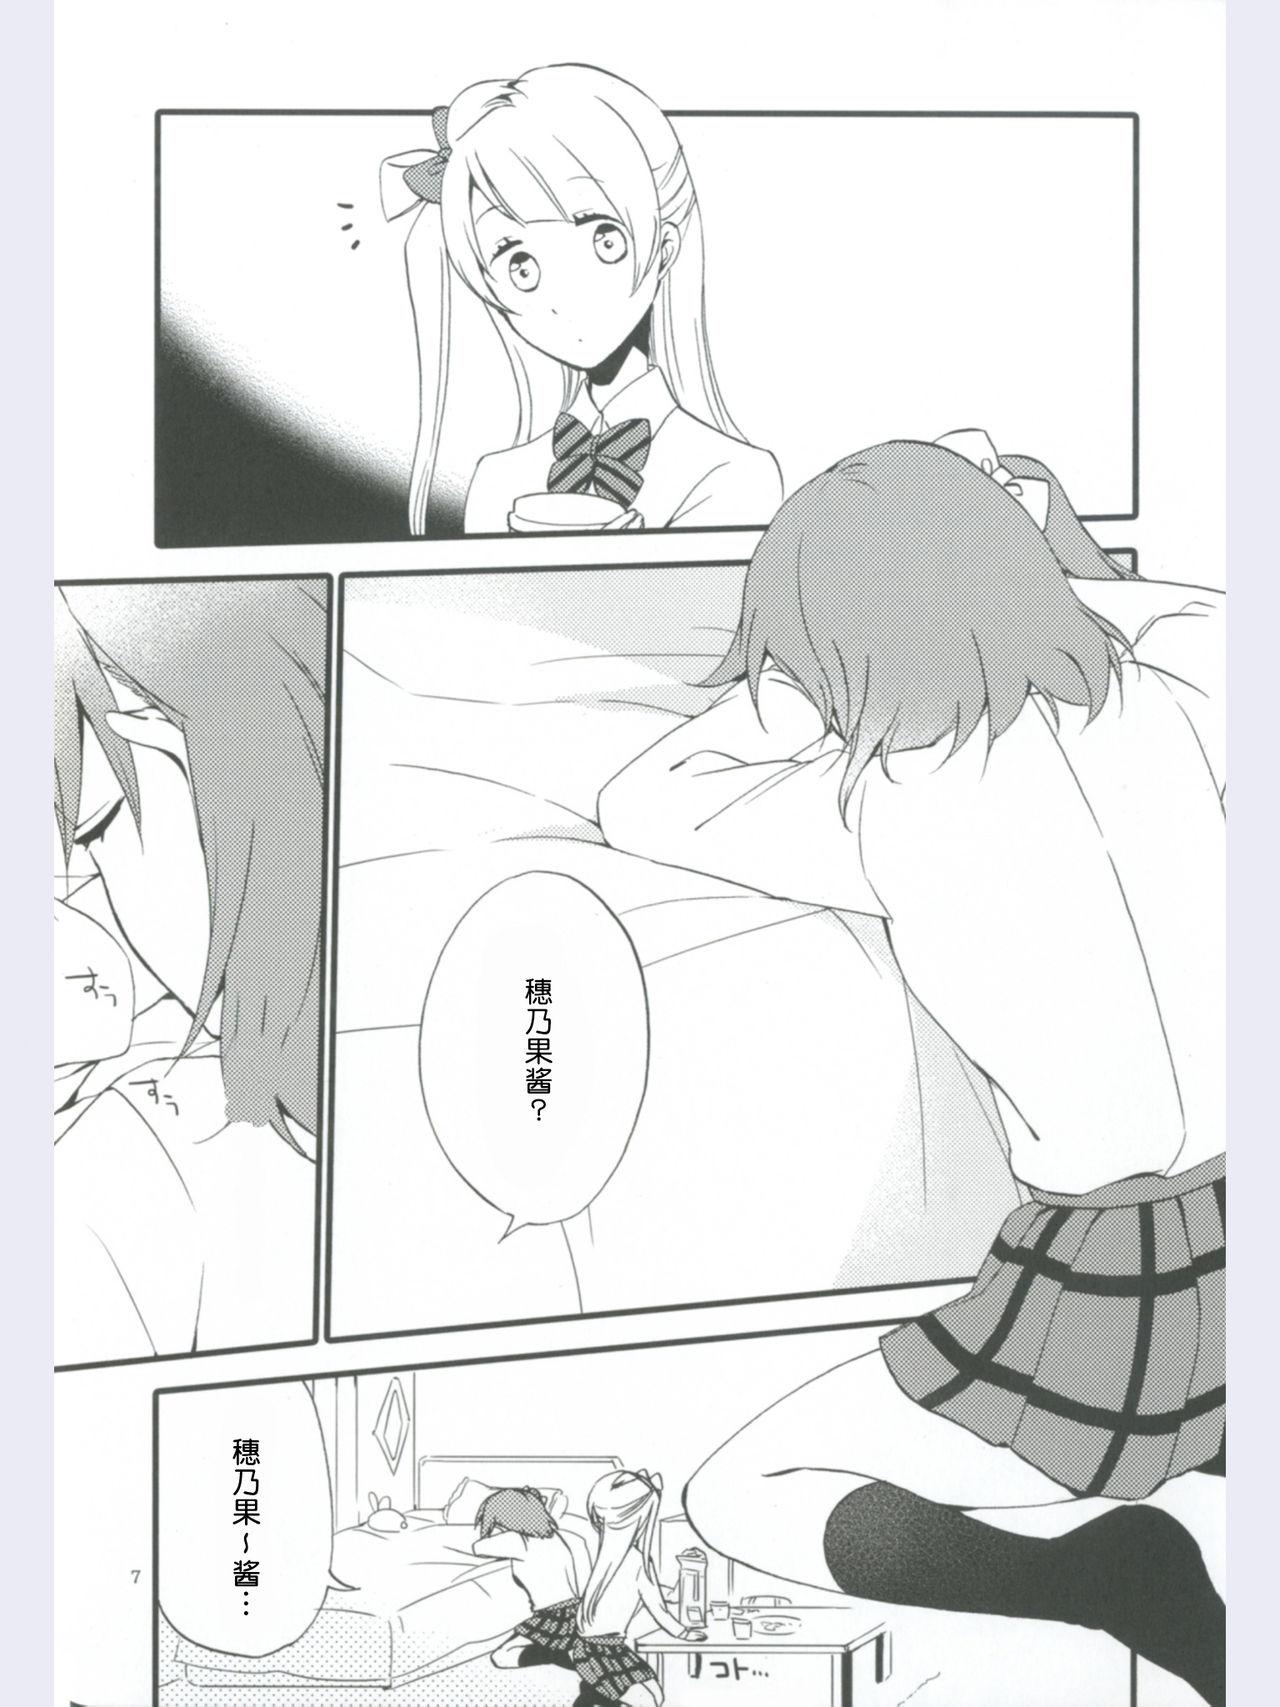 4some strawberry fraisier - Love live Thuylinh - Page 7